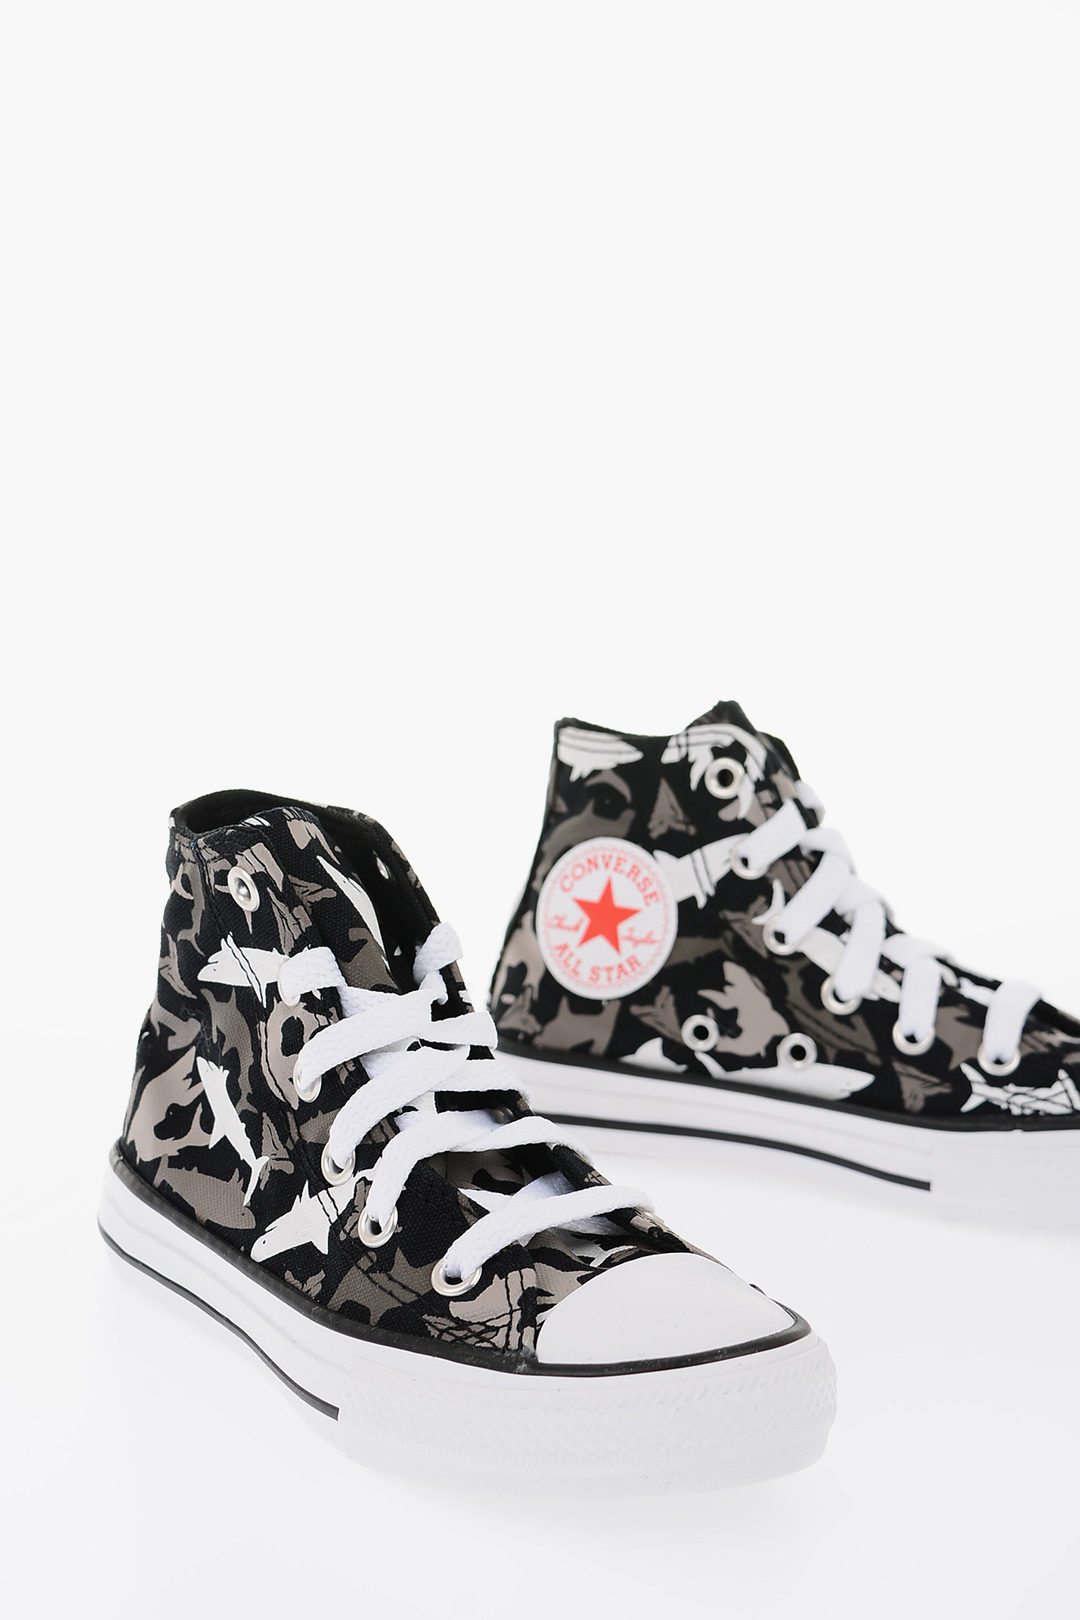 Triplicar aire Están familiarizados Converse KIDS ALL STAR Fabric Printed High-Top Sneakers boys - Glamood  Outlet